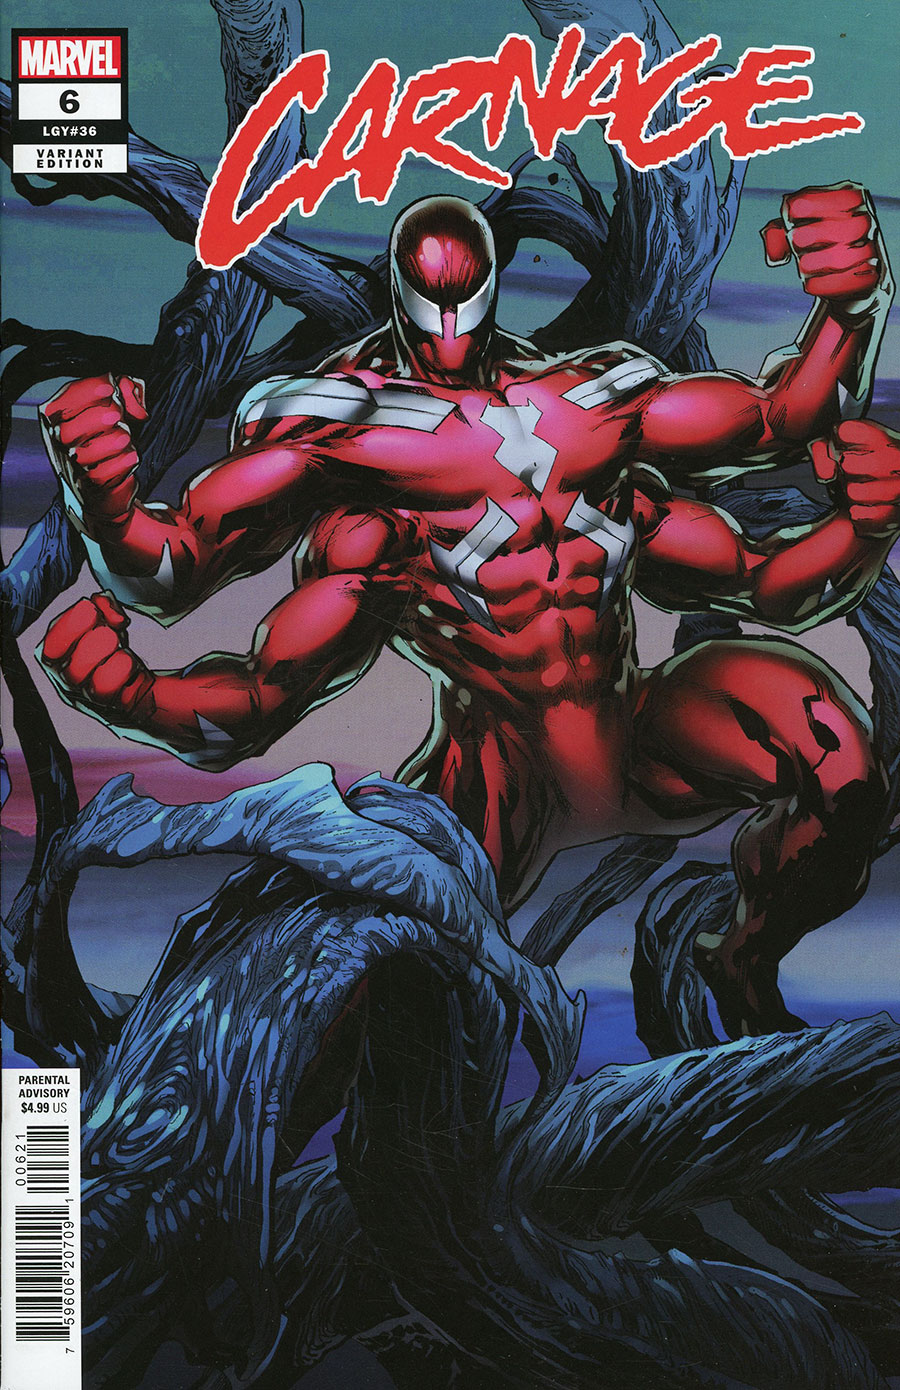 Carnage Vol 4 #6 Cover B Variant Ken Lashley Connecting Cover (Symbiosis Necrosis Part 4)